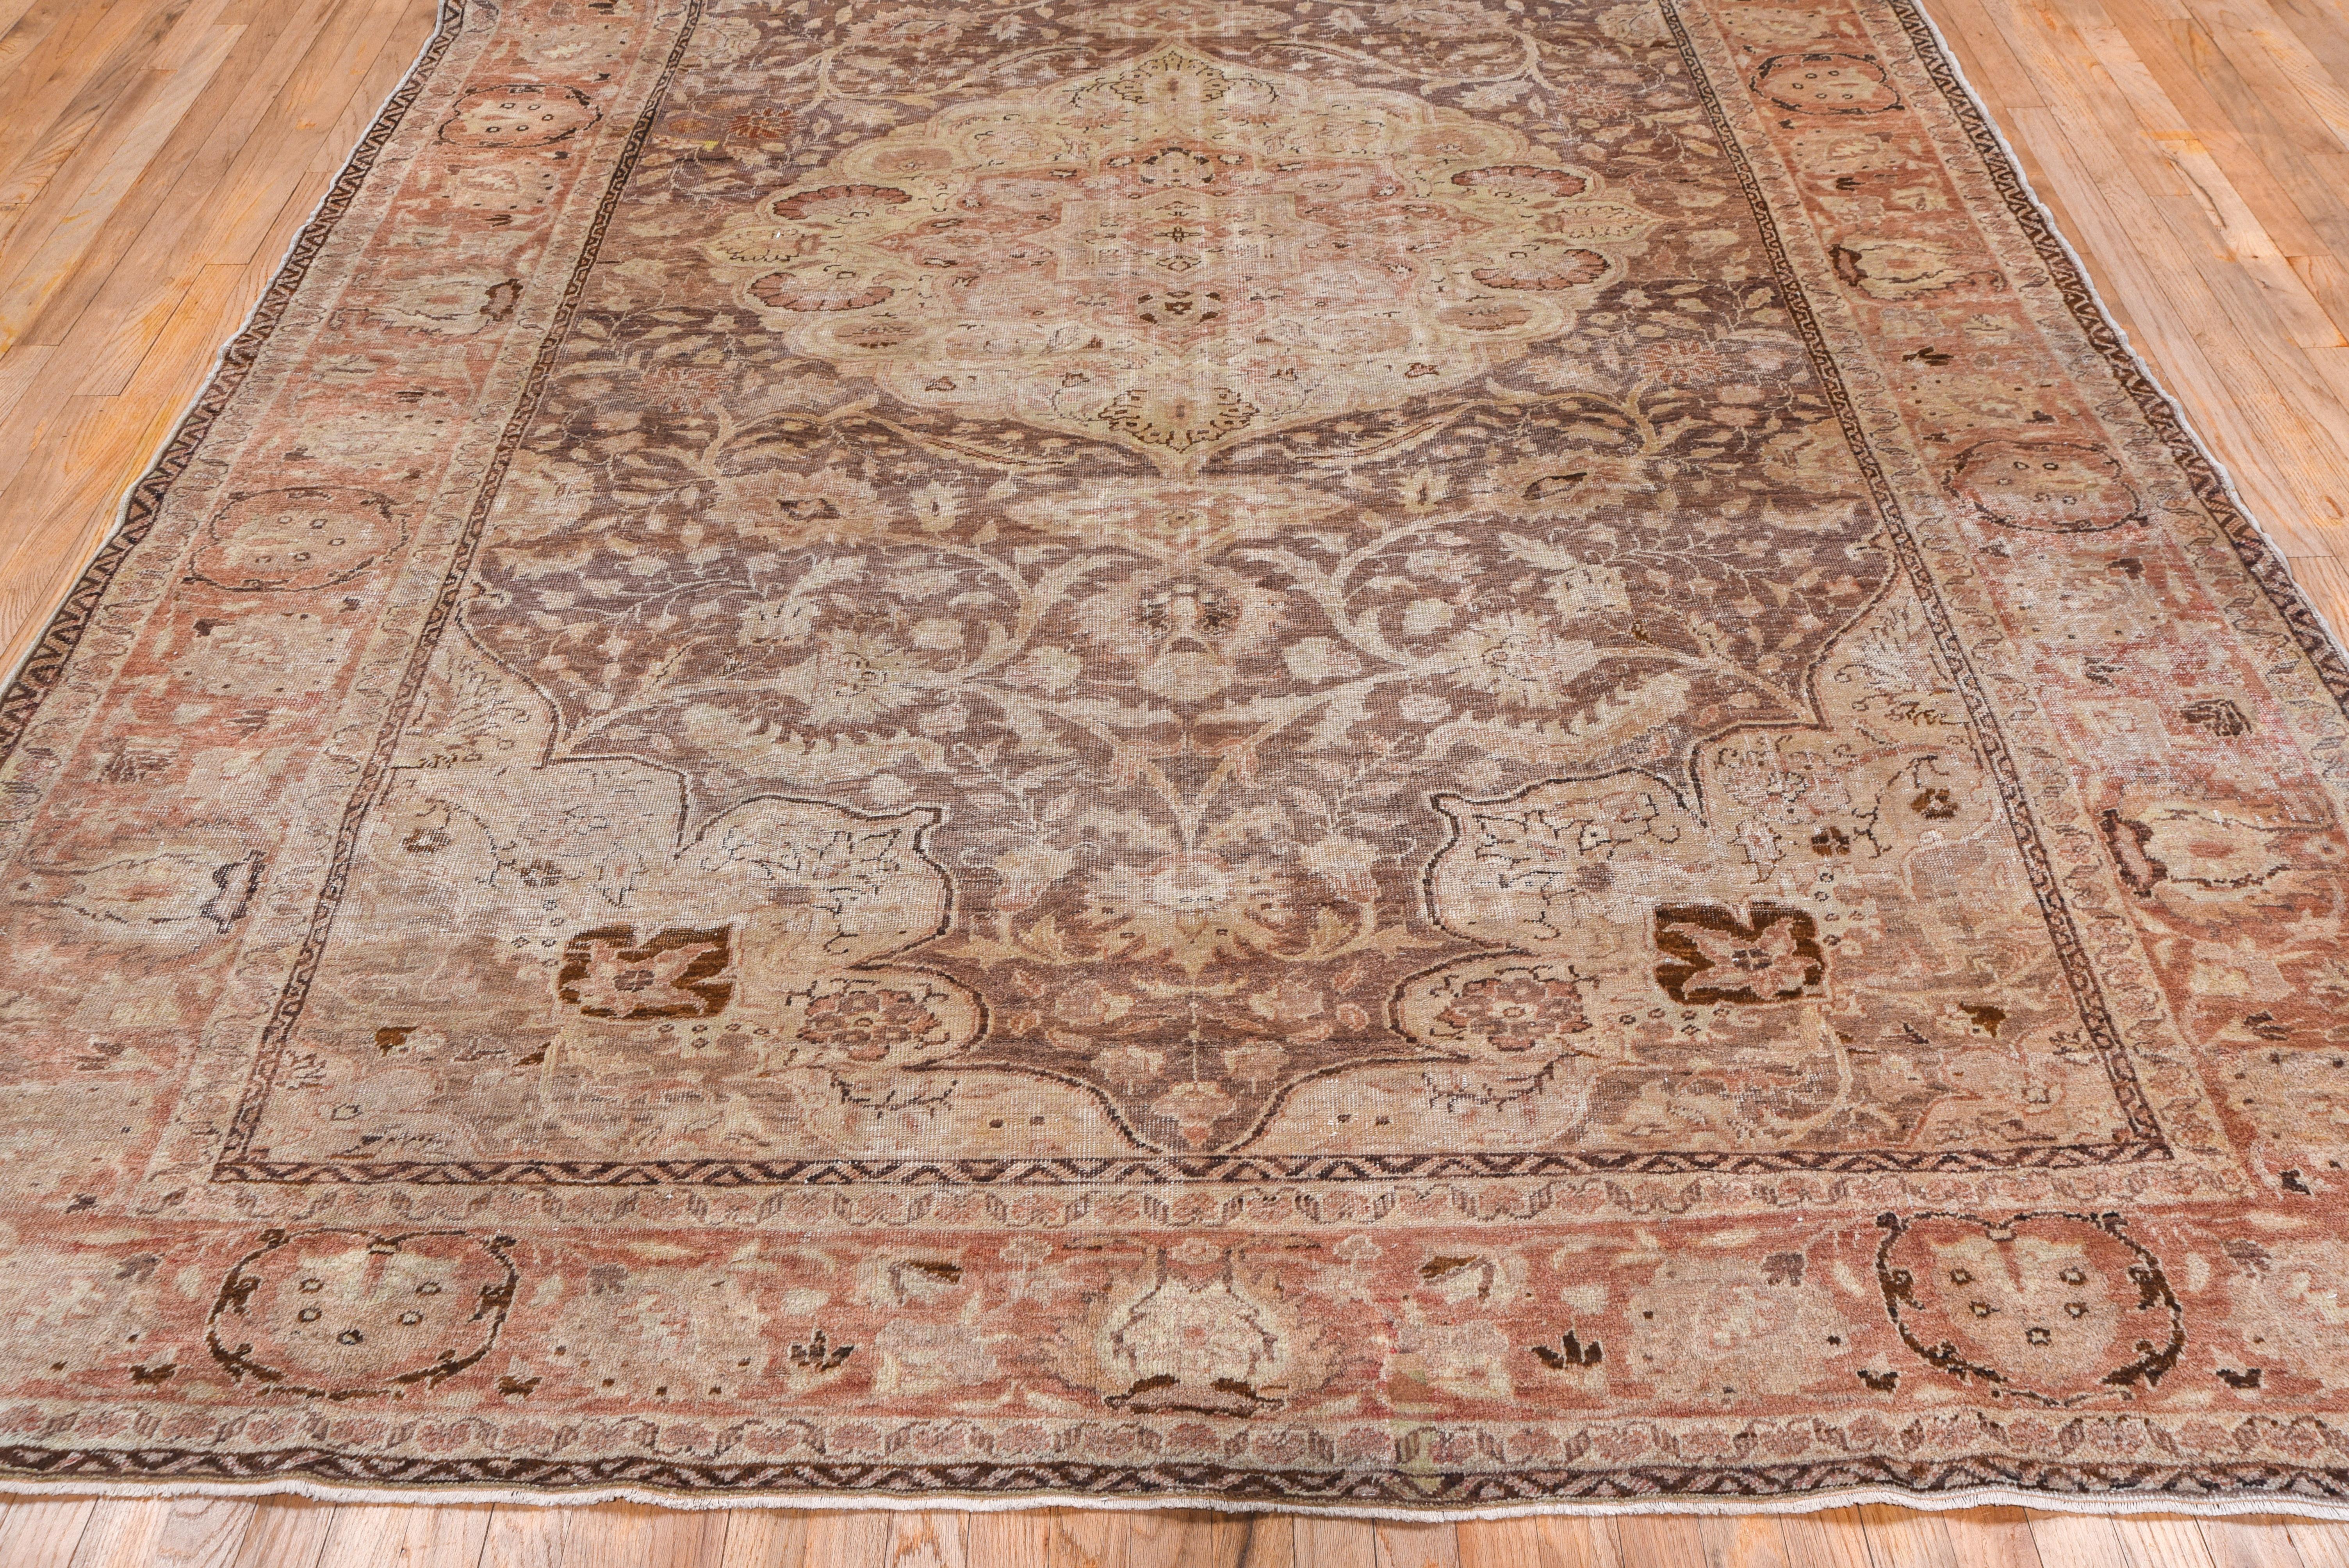 Wholly in the curvilinear Persian style, this moderately woven city carpet shows a large lightly scalloped and end-pointed ecru medallion, filled with palmettes and with doubled pendants, on a brown field with strong arabesques, ragged palmettes and